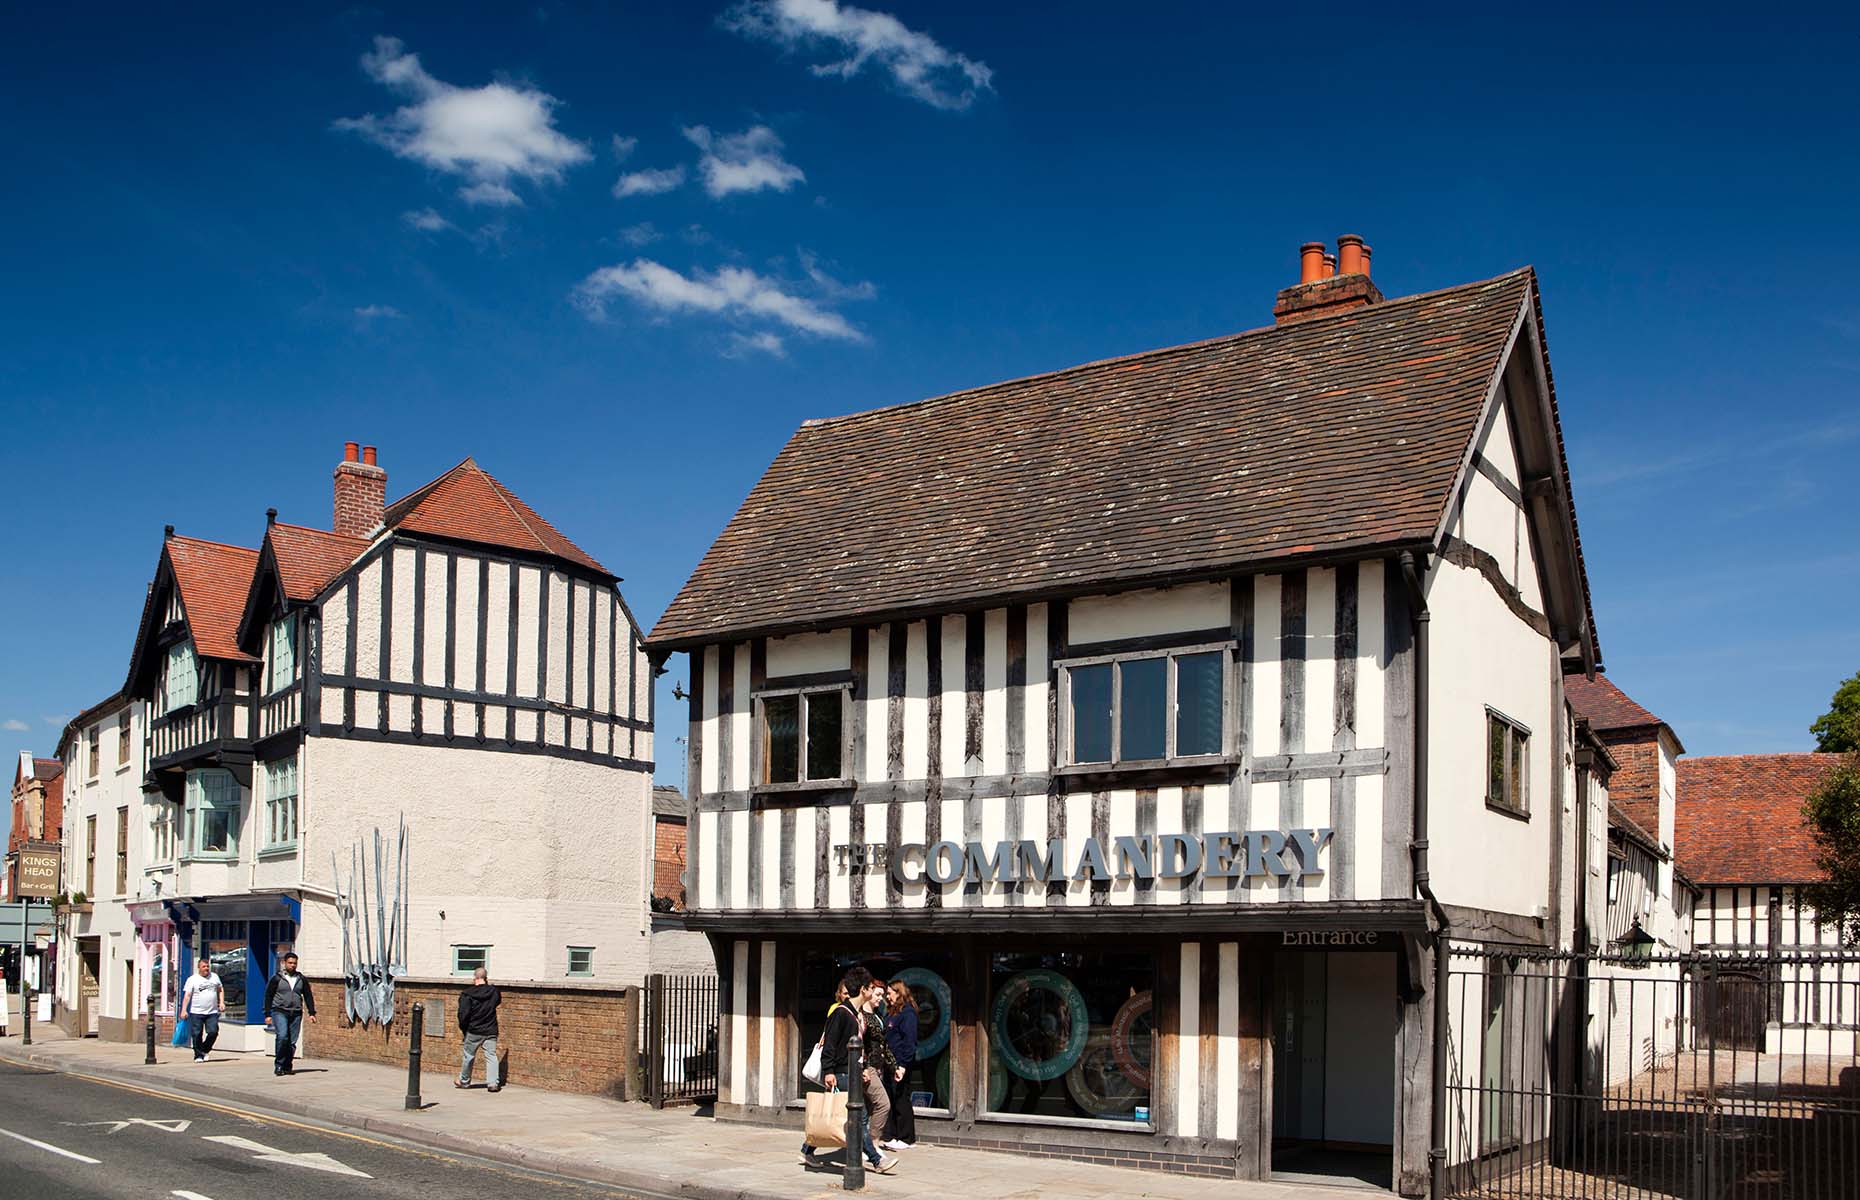 The commandery in Worcester (Image: travelib/Alamy Stock Photo)